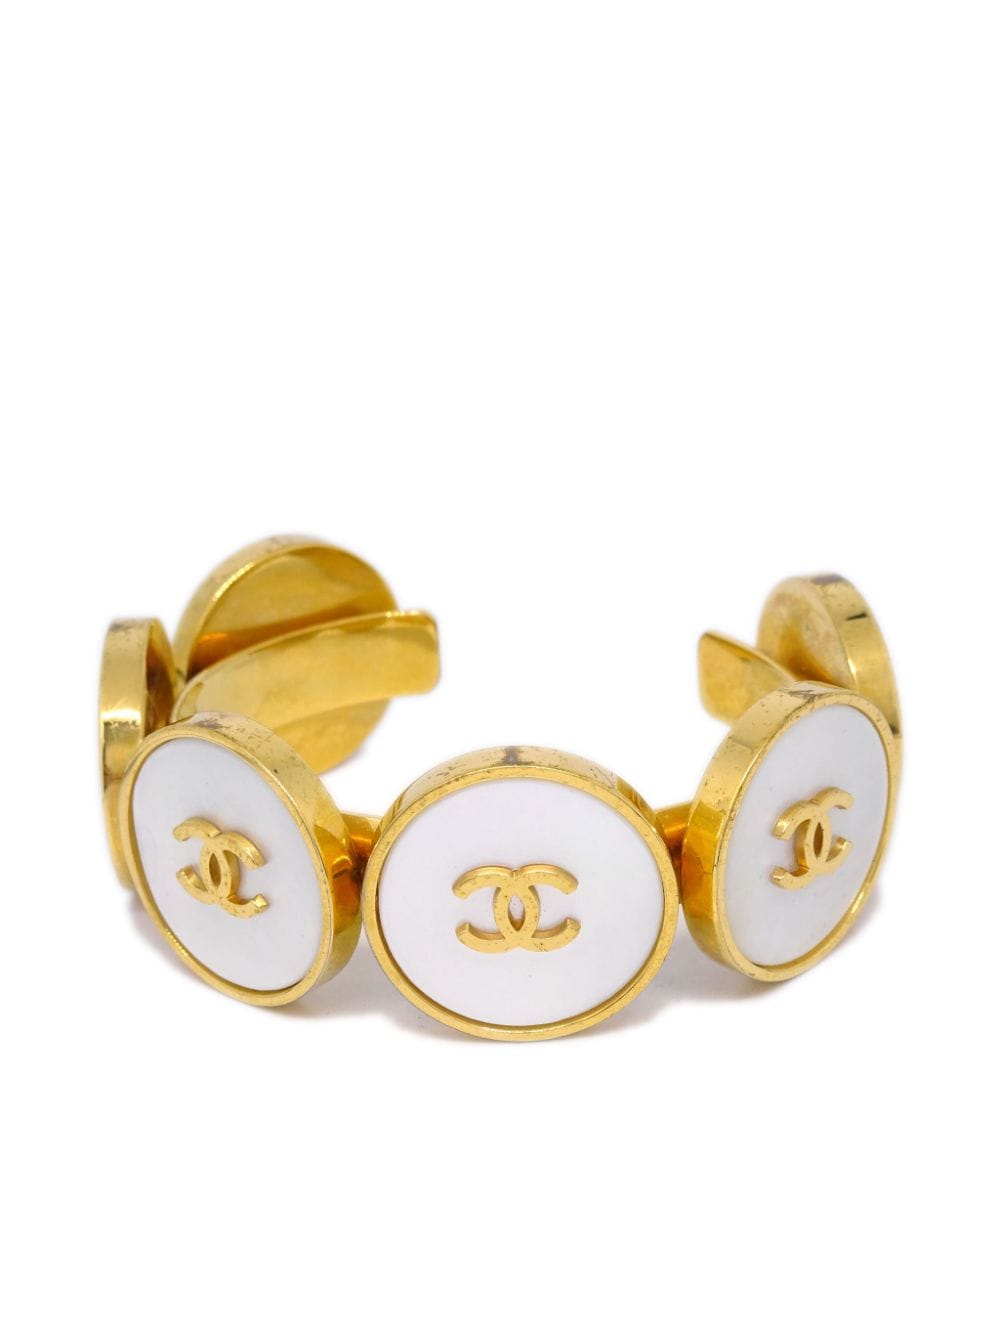 Pre-owned Chanel 1996 Cc Shell Bangle Bracelet In Gold